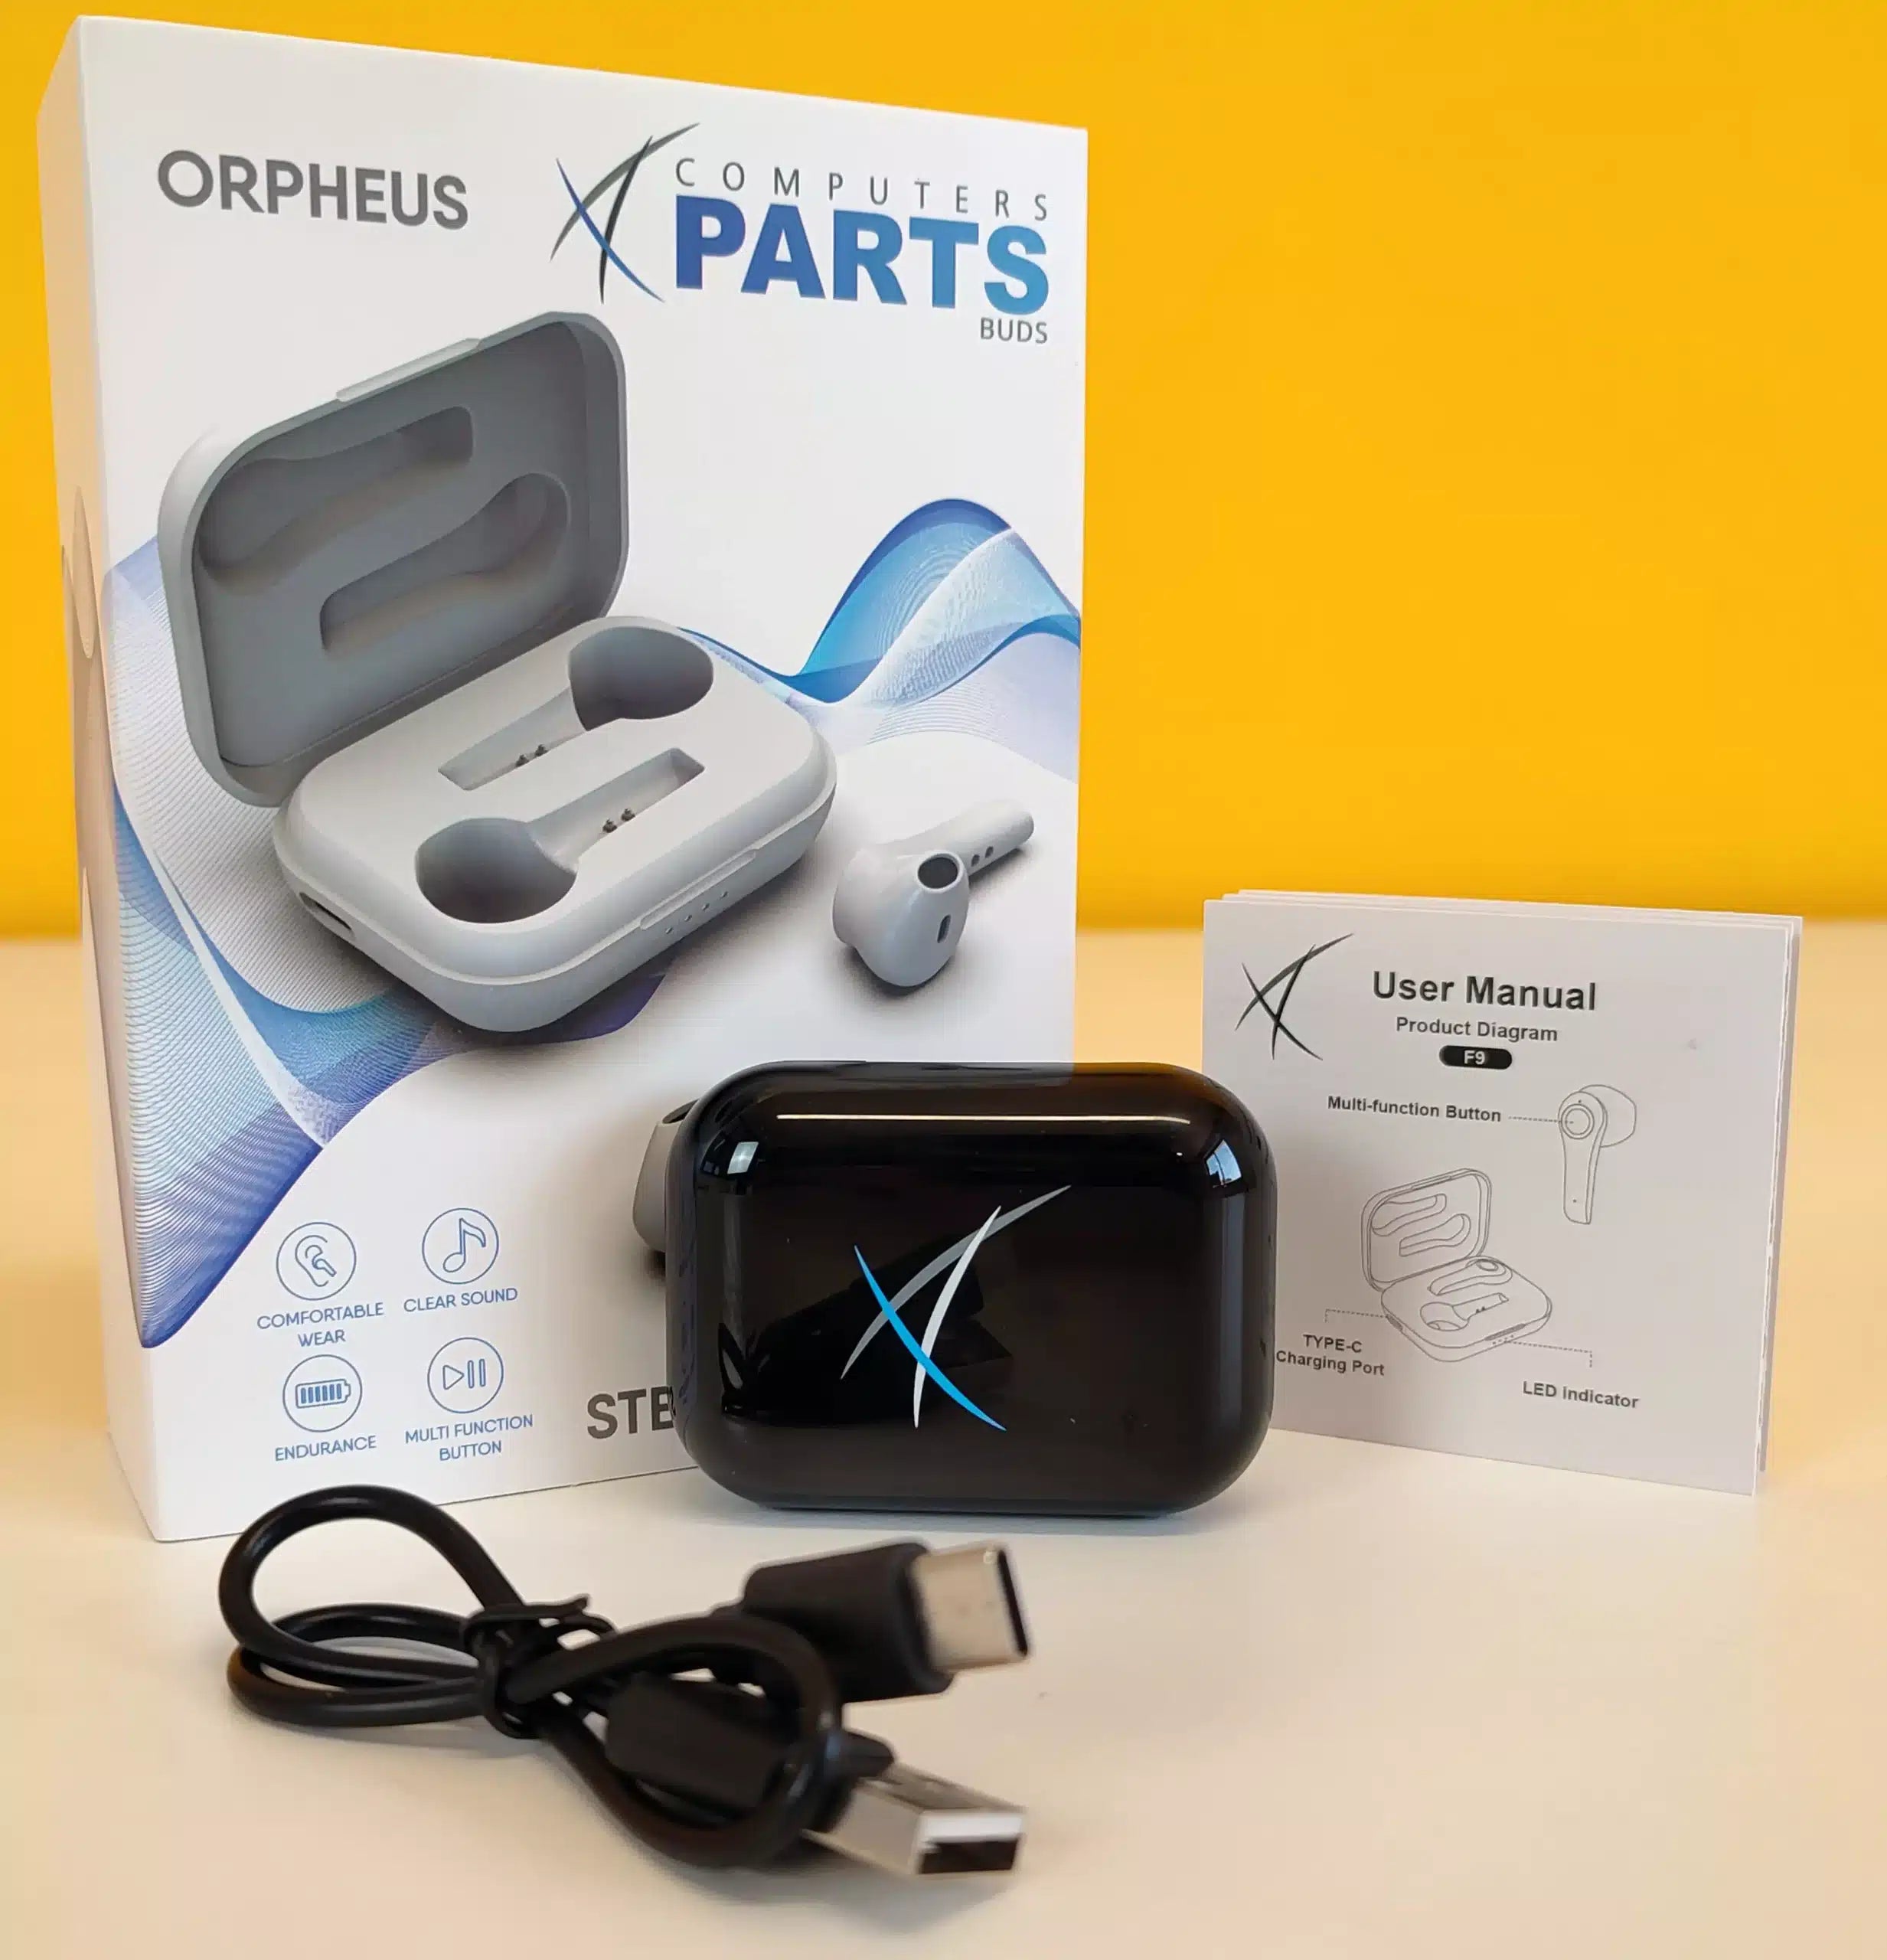 Orpheus Wireless Earphones Stereo Bluetooth Headphones Listen to your favorite music in high quality and wirelessly